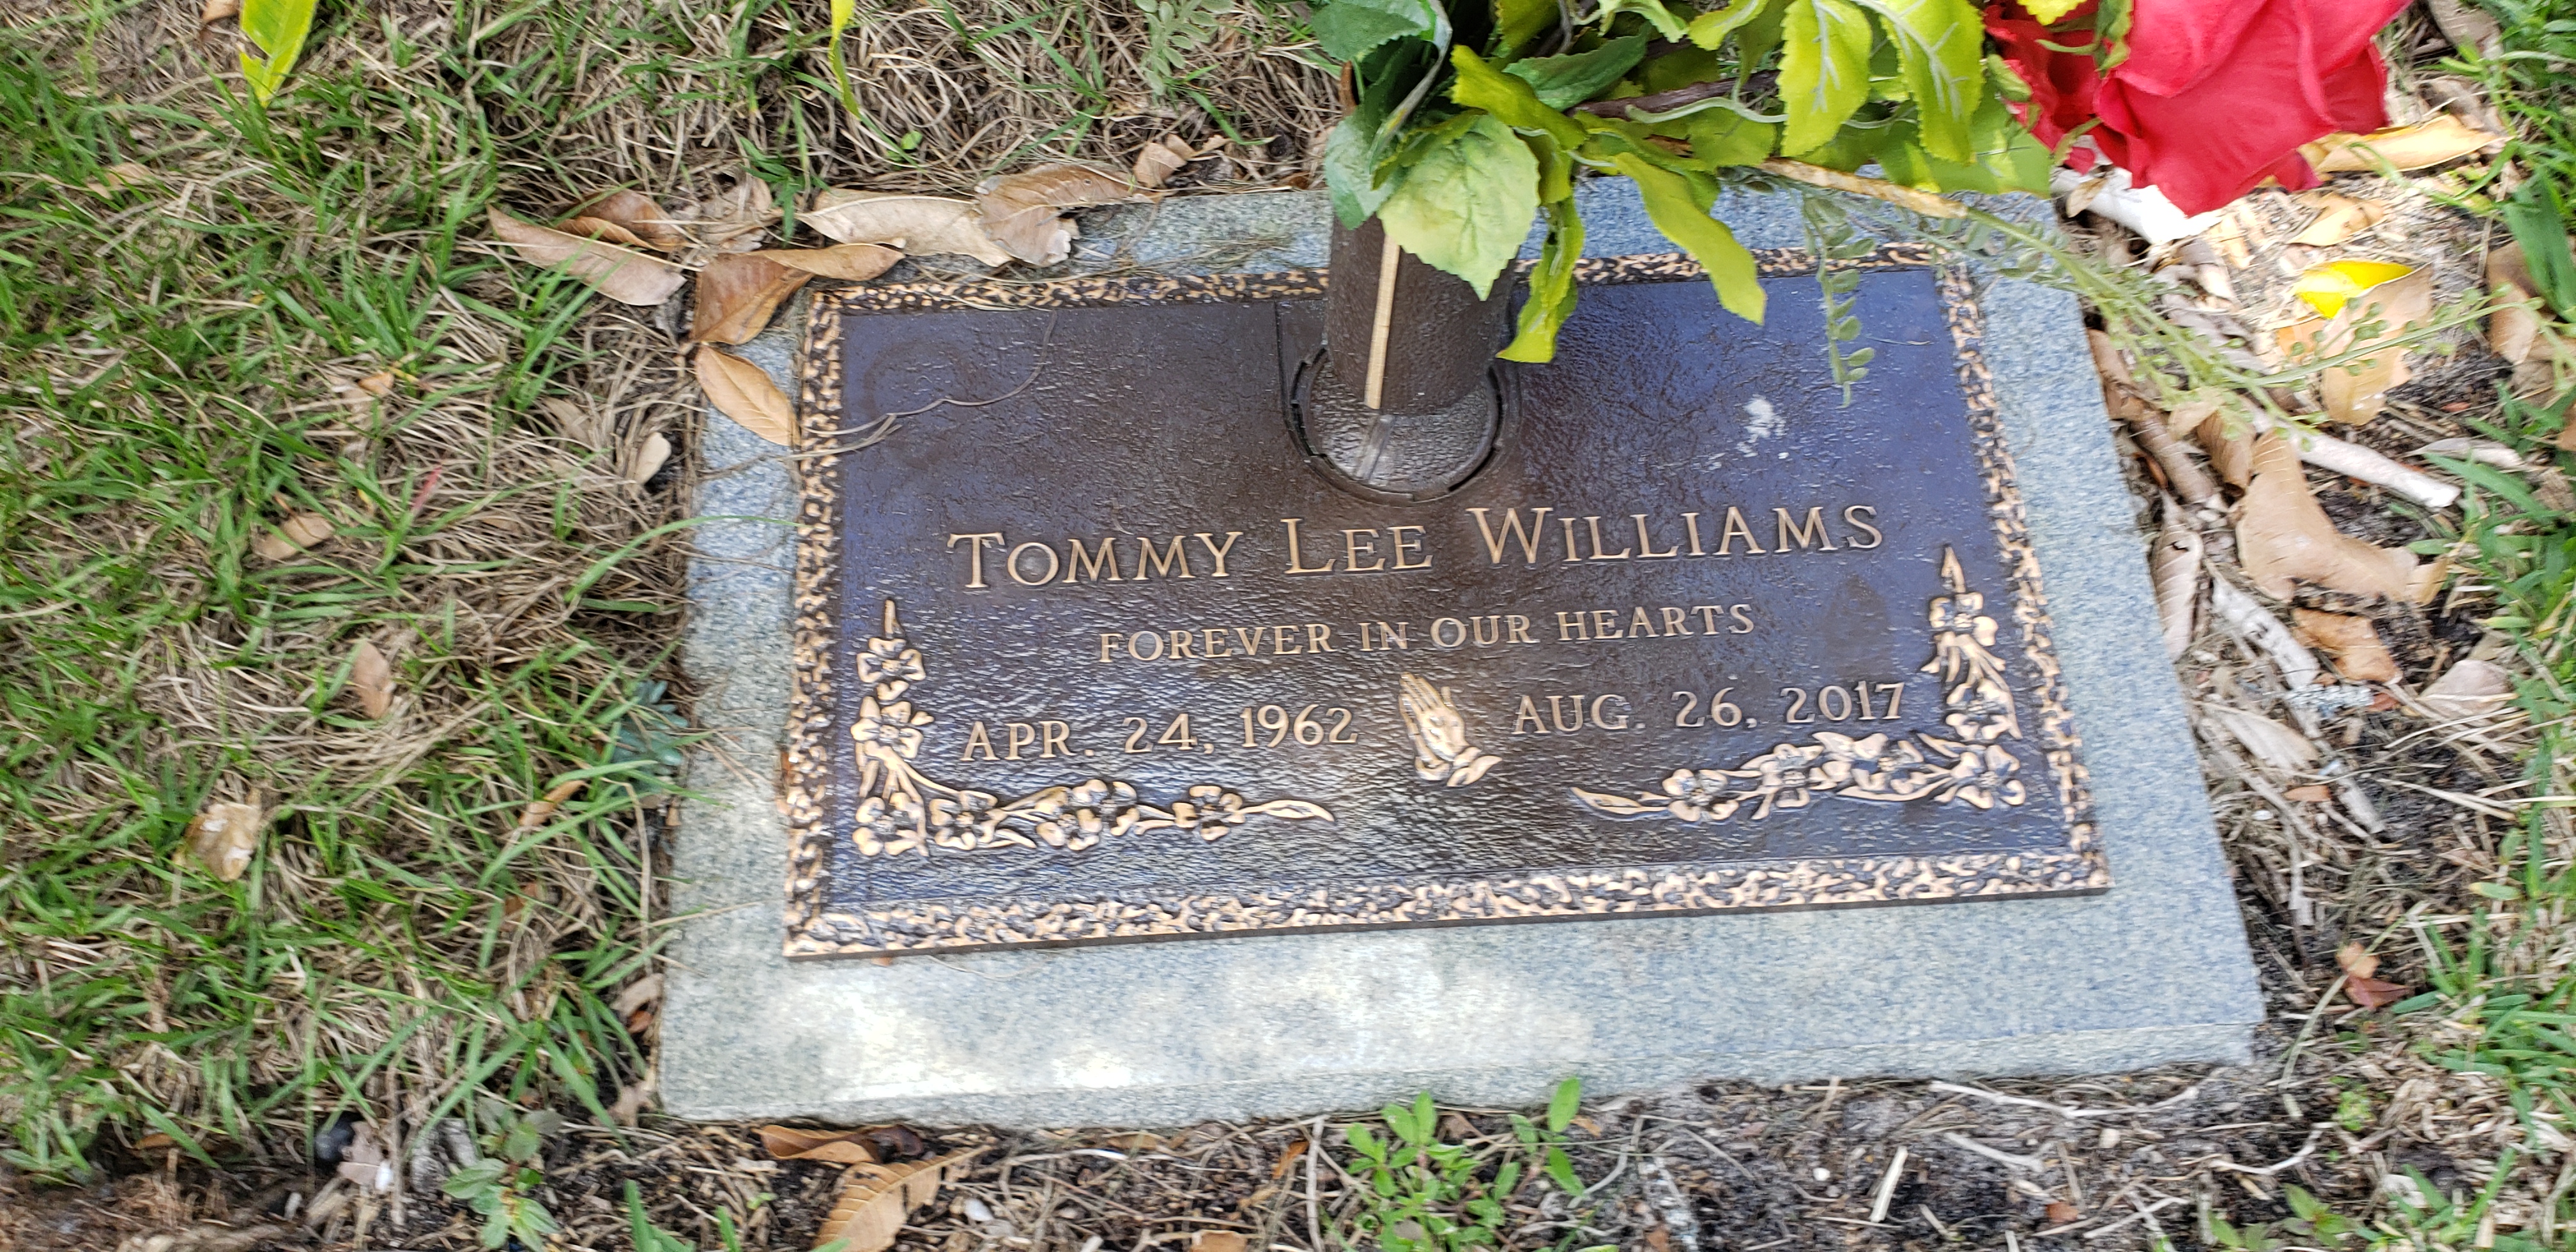 Tommy Lee Williams